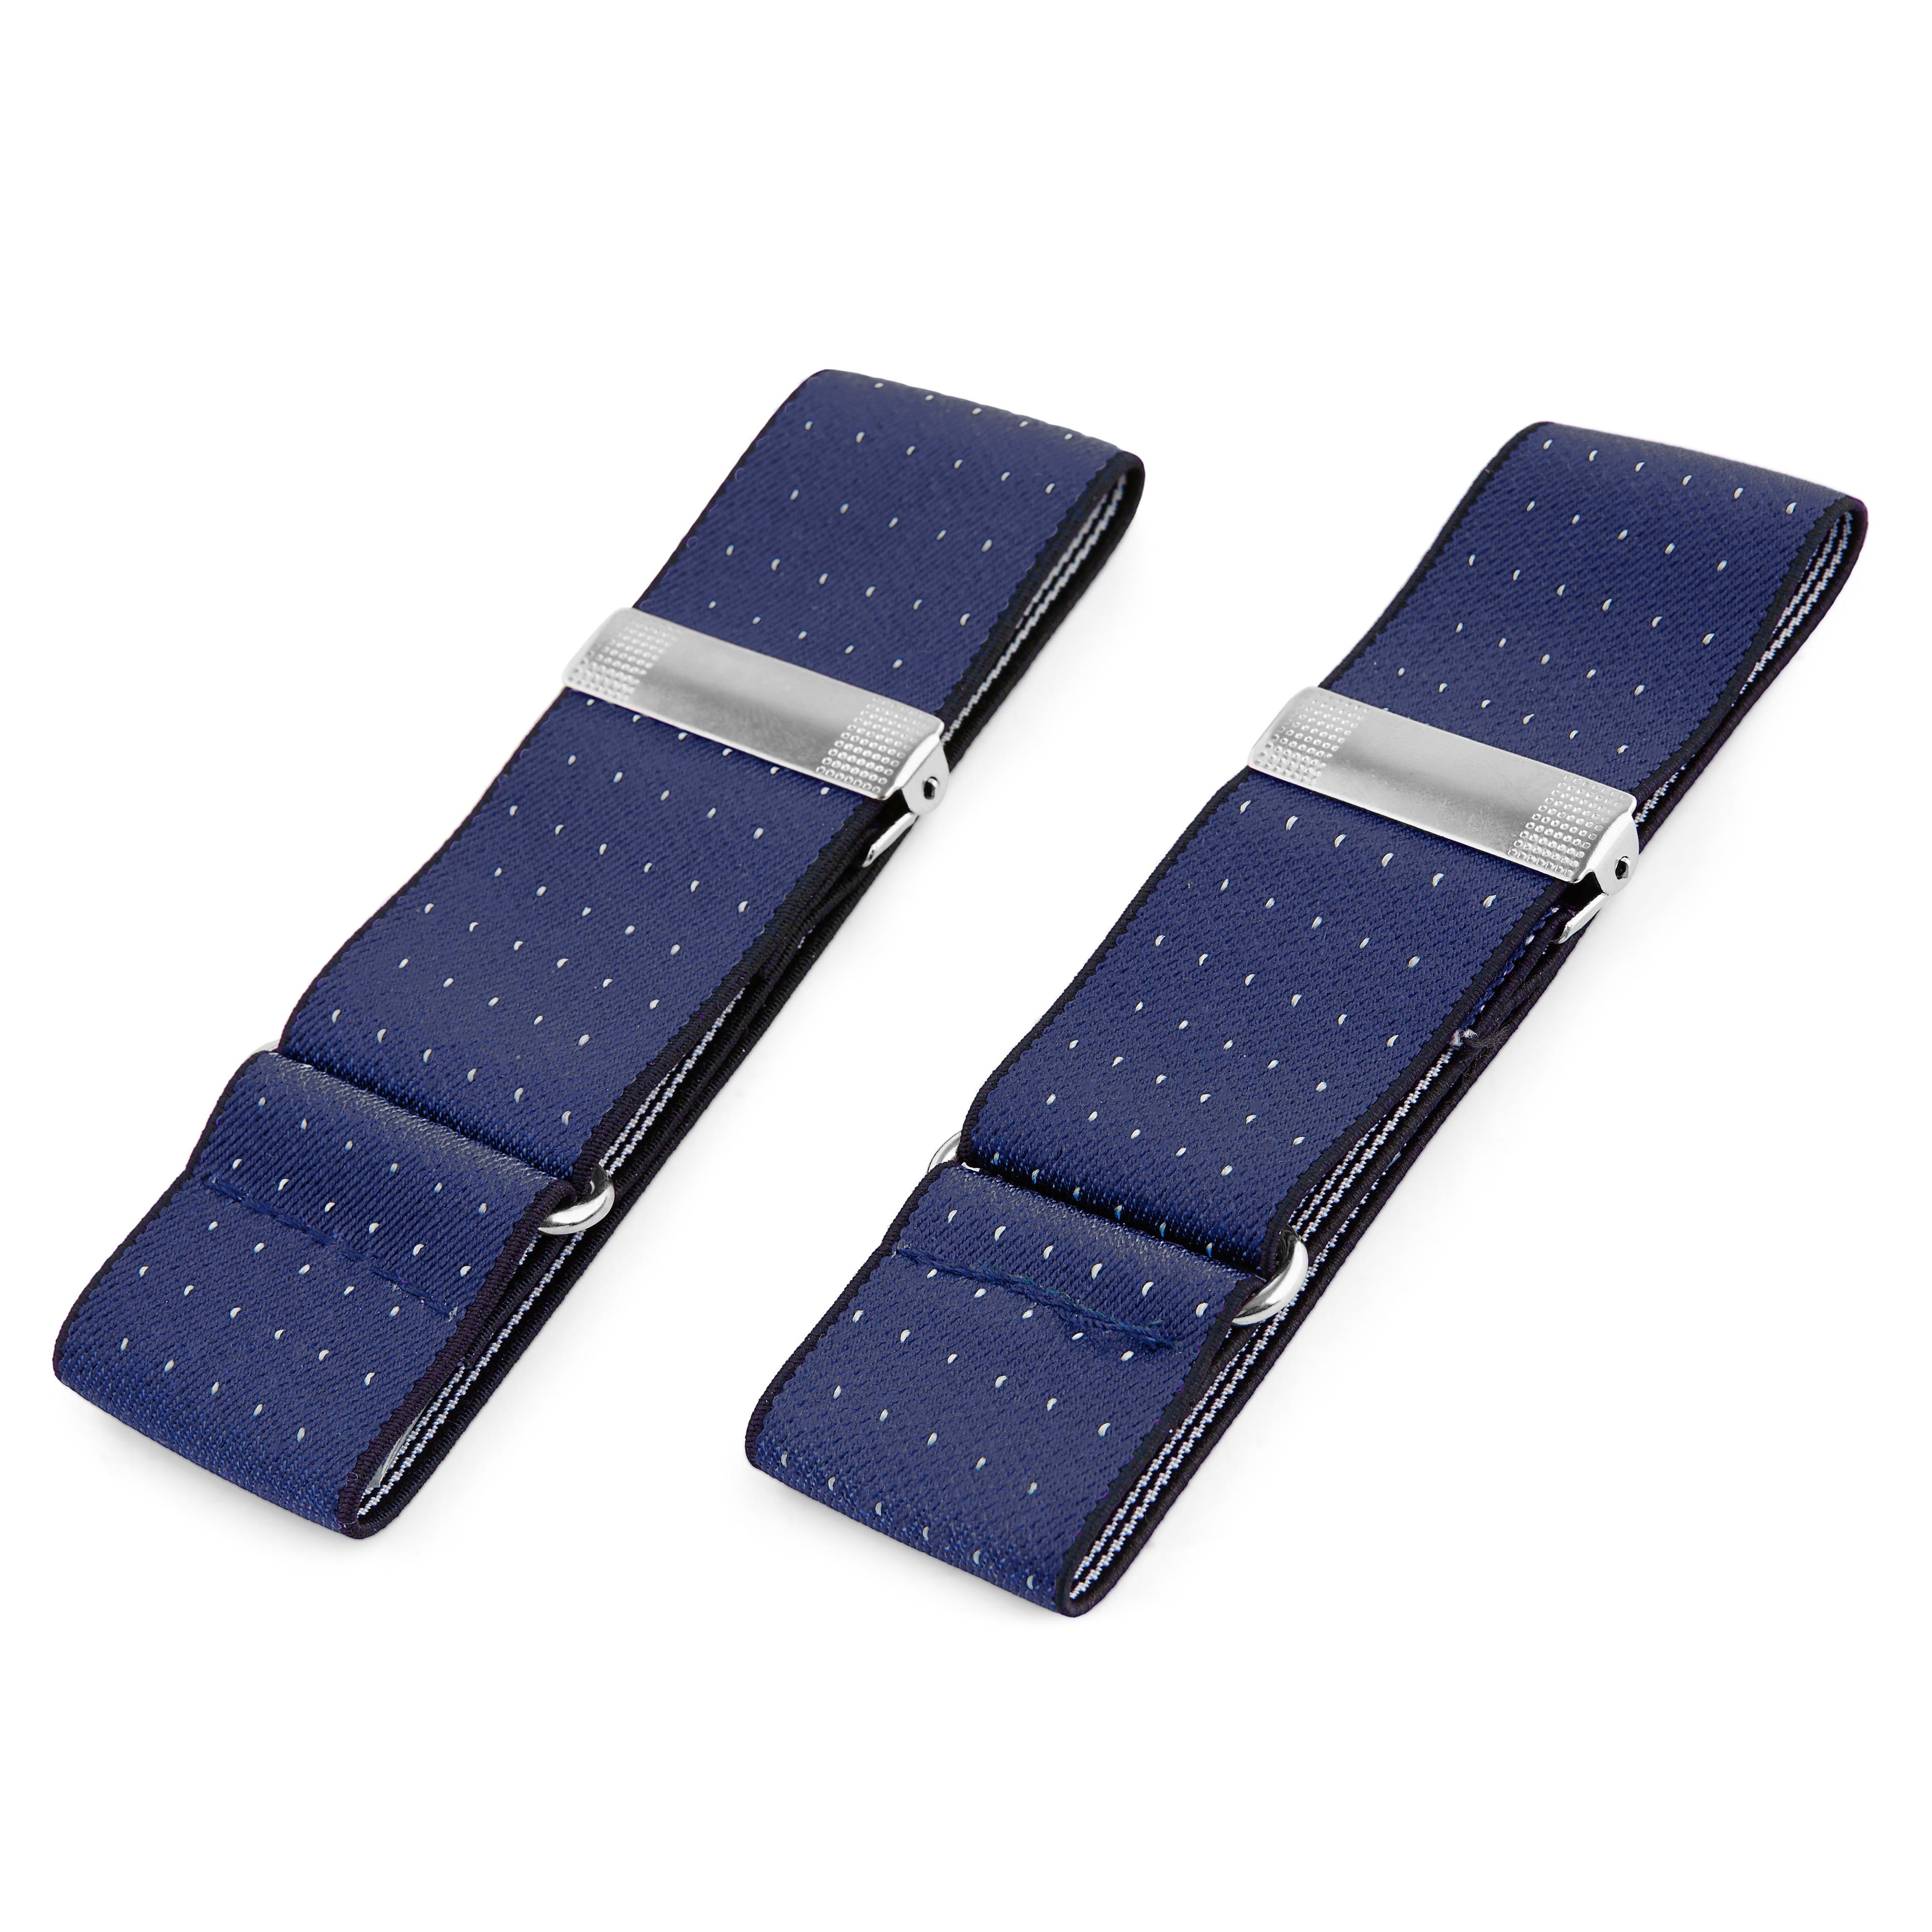 Wide Dotted Navy Sleeve Garters